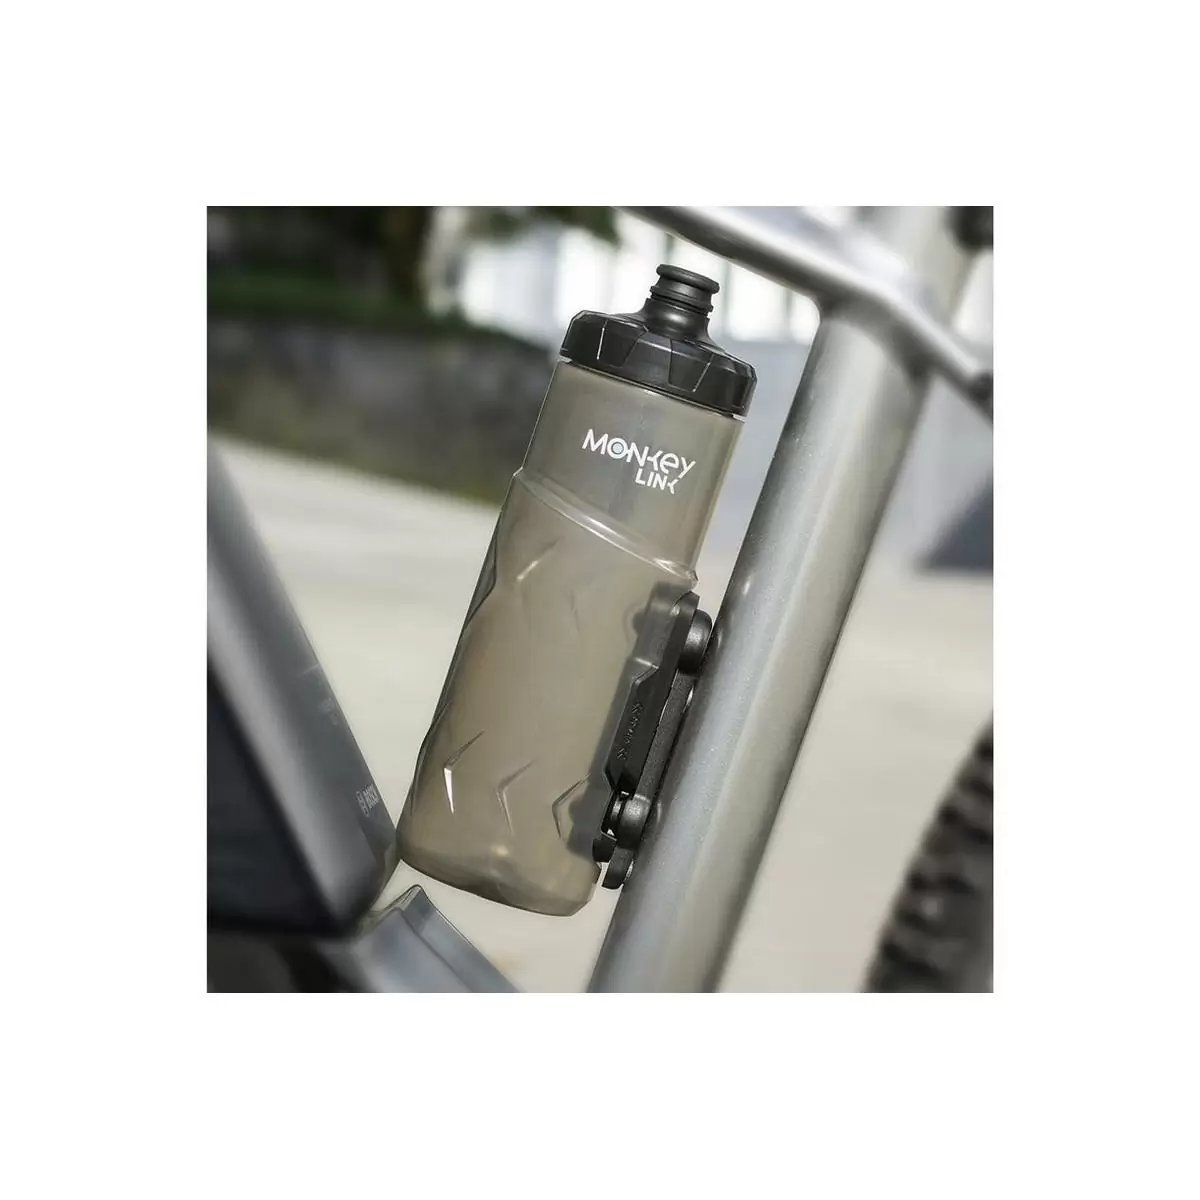 Waterbottle 600ml transparent bottle holder with magnetic attack #2